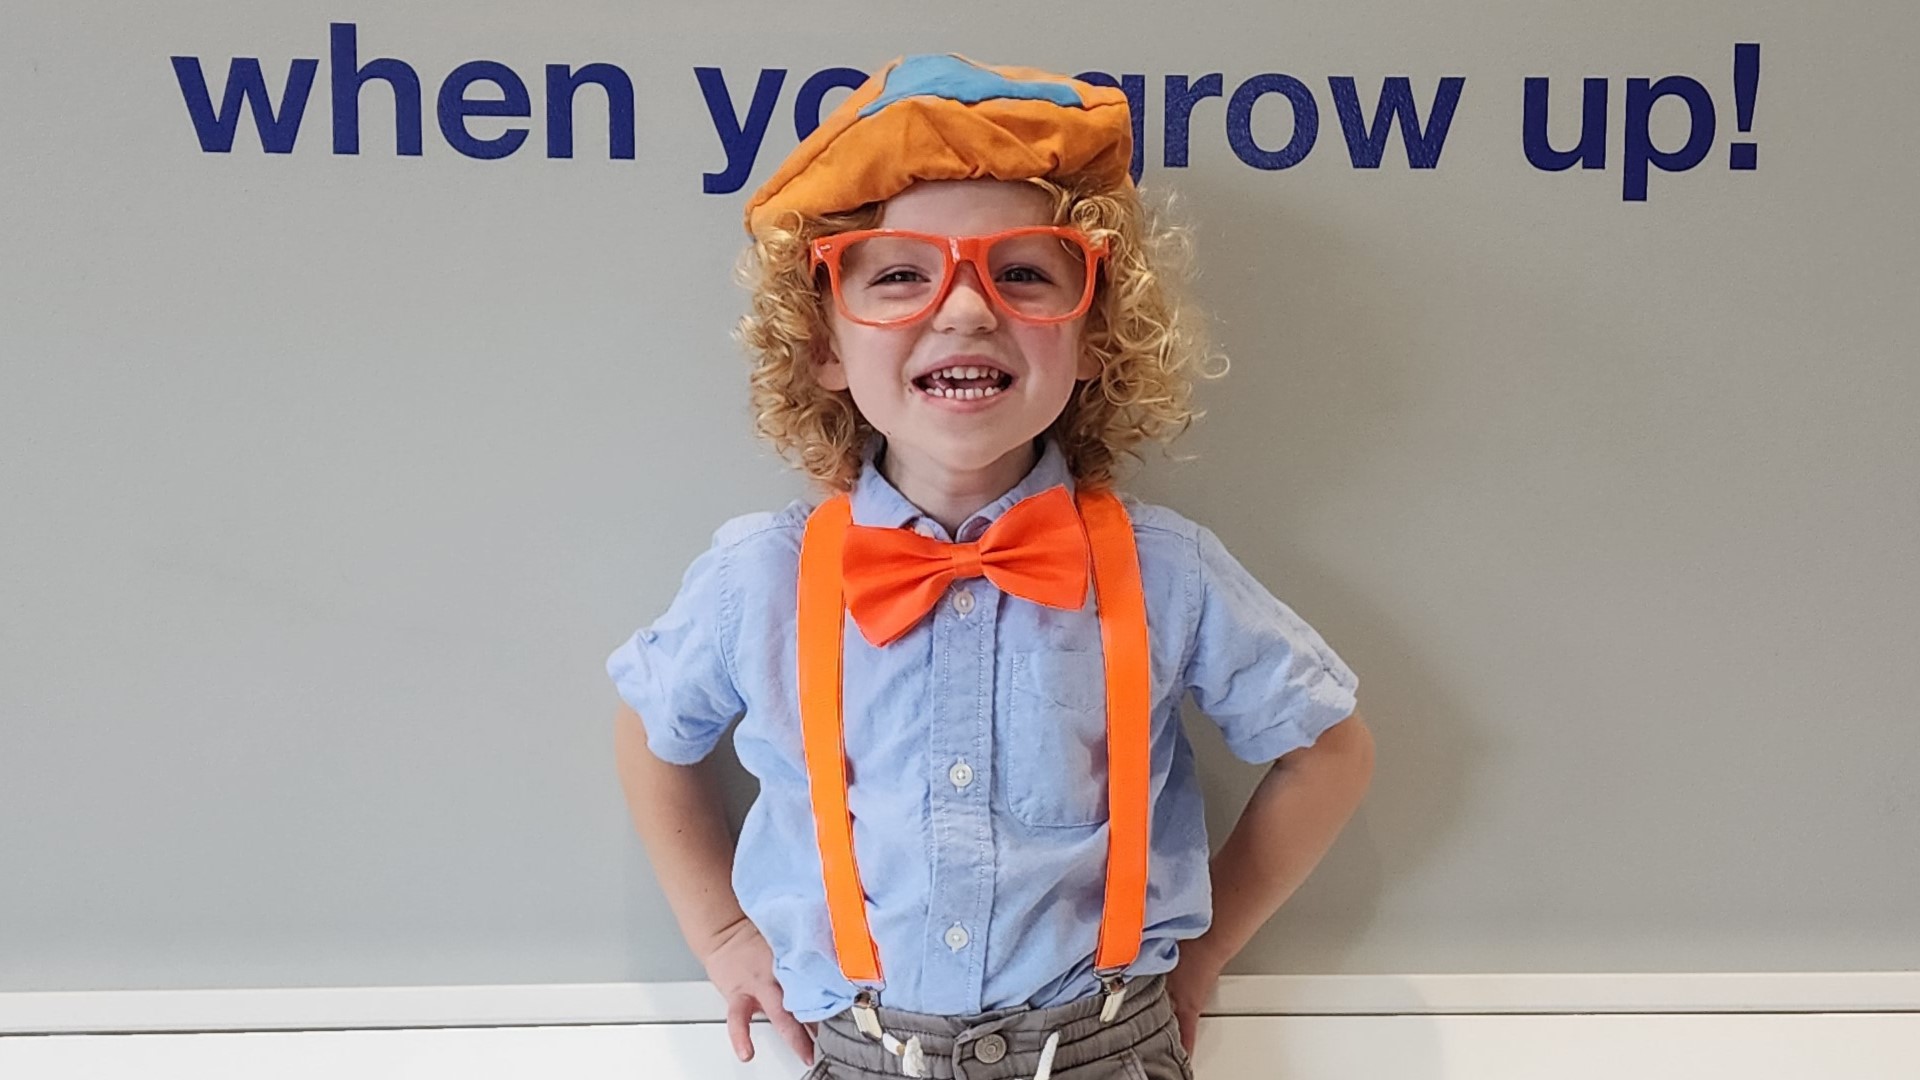 Levi, almost 3 years old, is trying to get Blippi to visit St. Louis and film an episode at The Magic House.